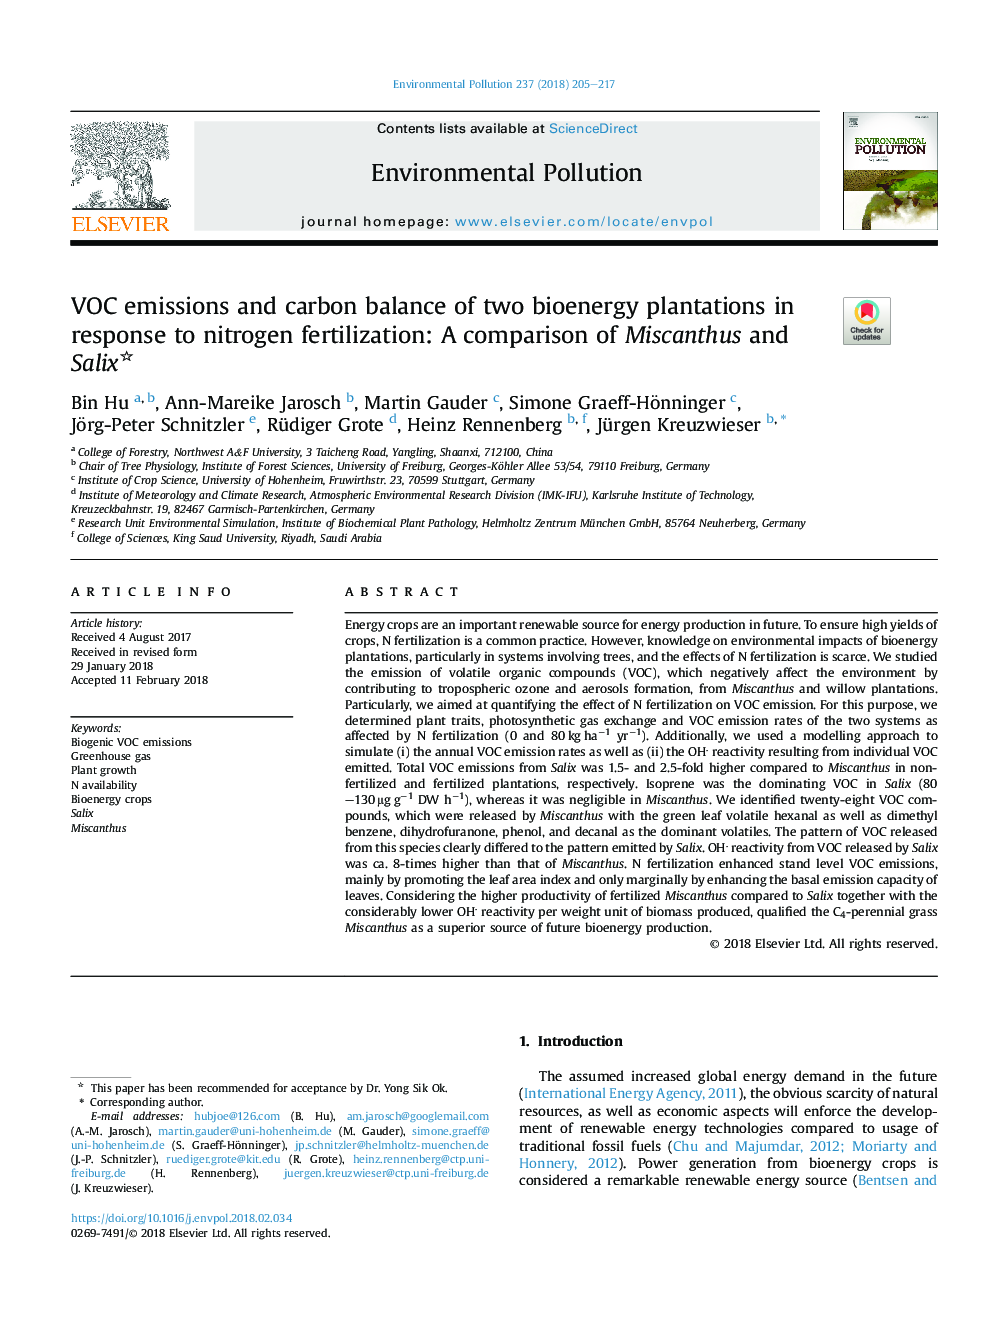 VOC emissions and carbon balance of two bioenergy plantations in response to nitrogen fertilization: A comparison of Miscanthus and Salix